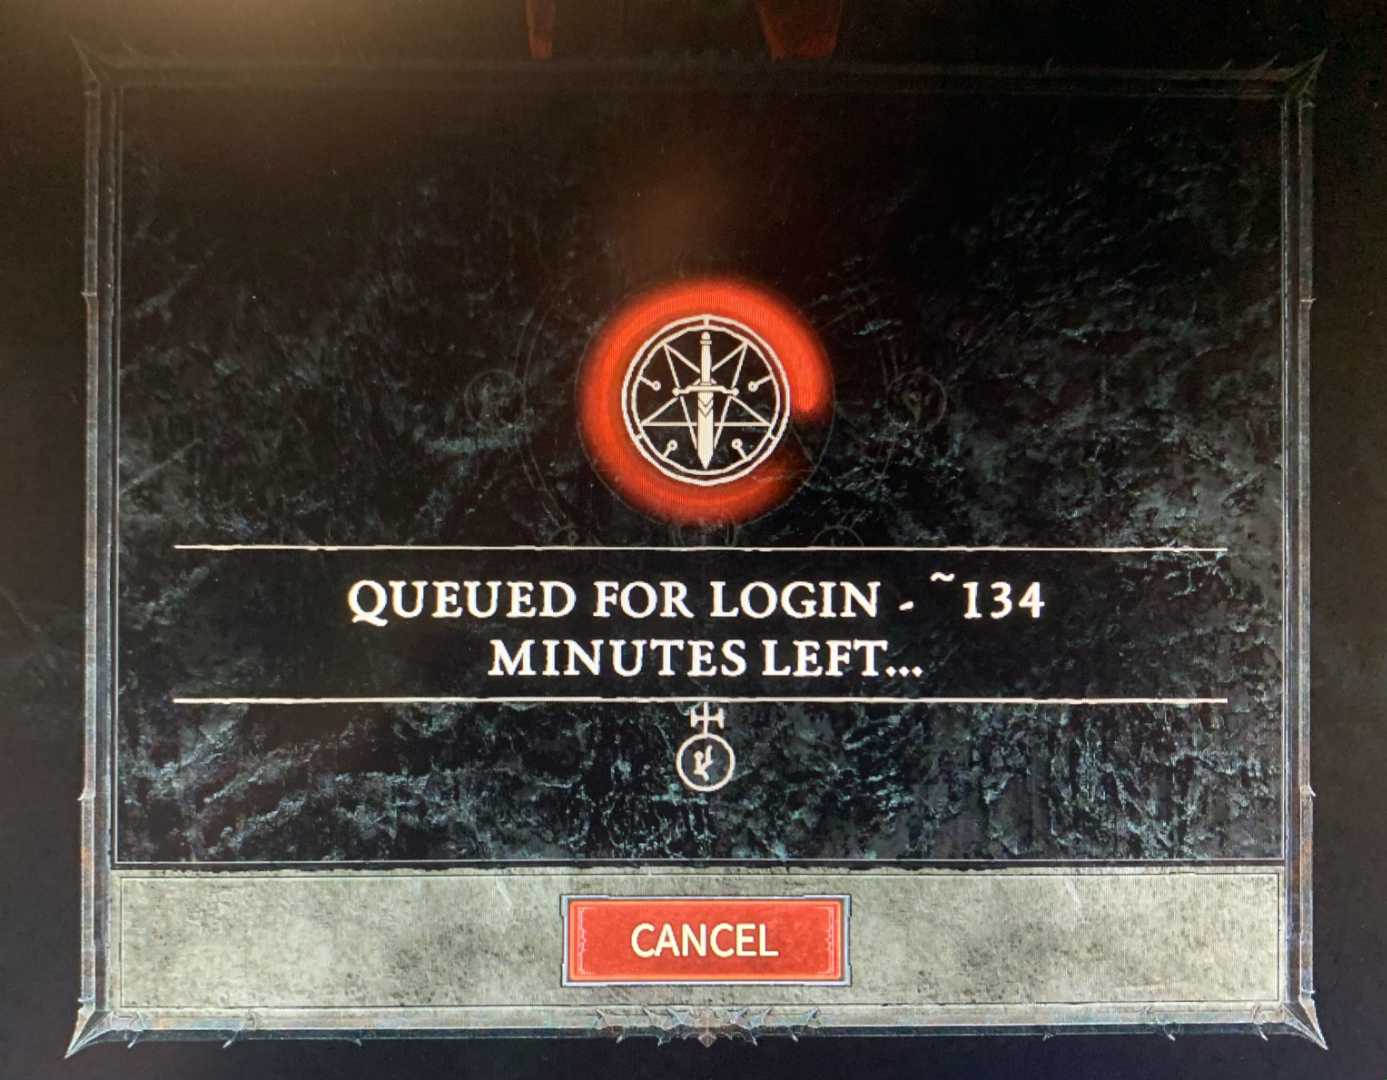 The game's open beta had some issues with players being queued to login for hours. But, it was fun once the connection issues shook out!